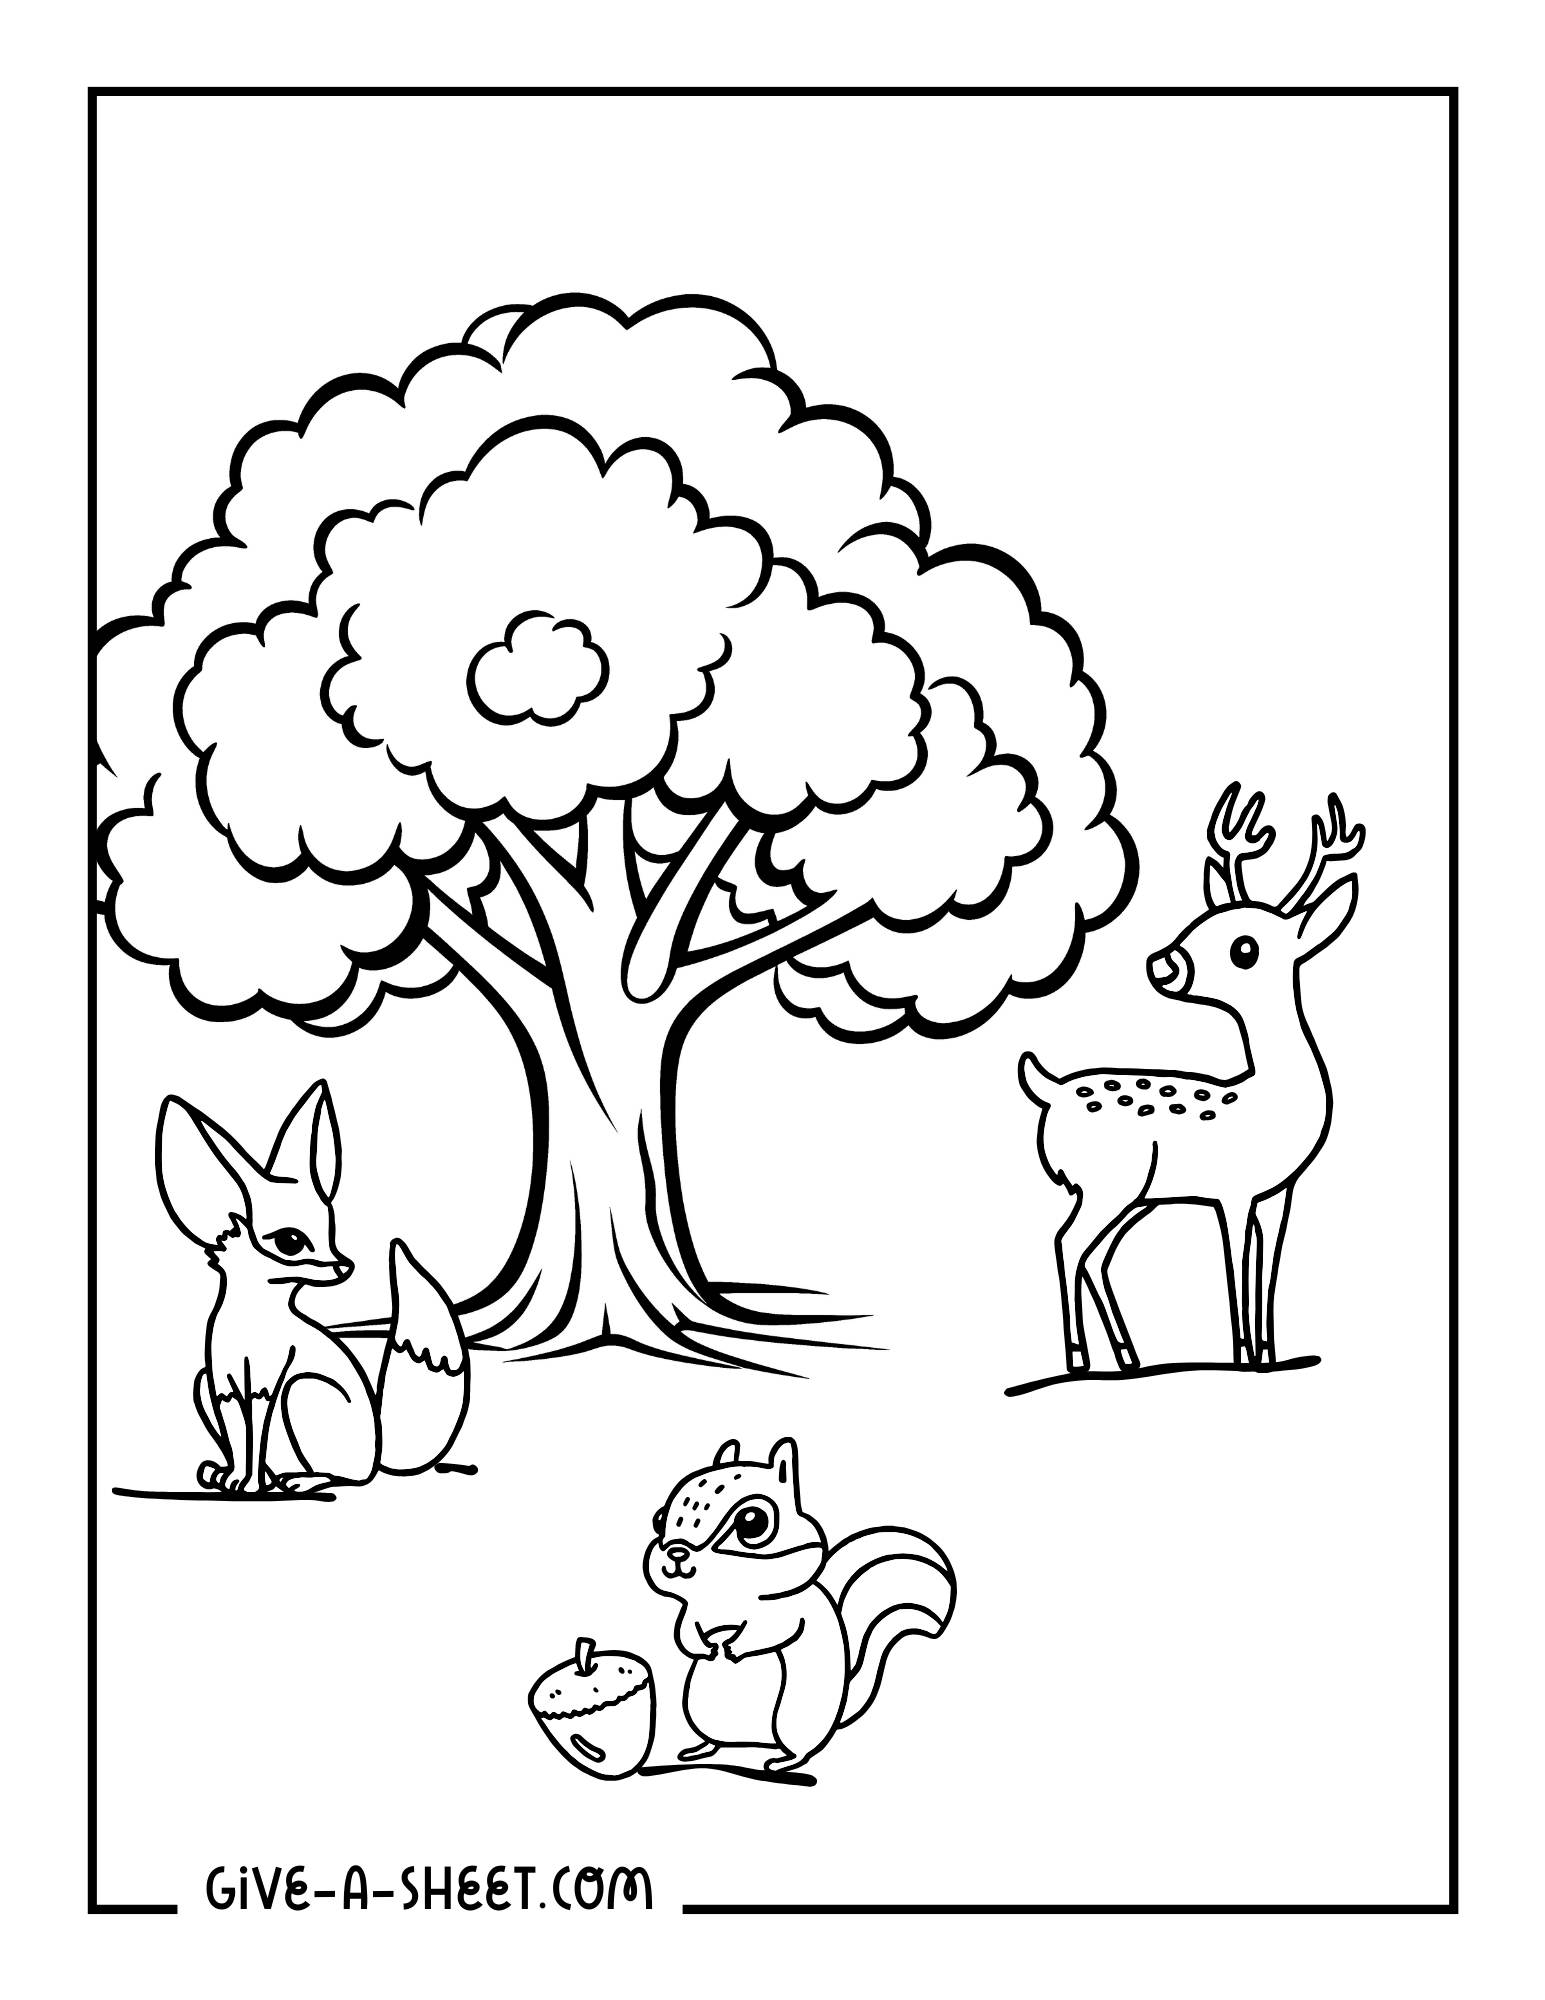 Printable tree illustrations with animals coloring page for kids.